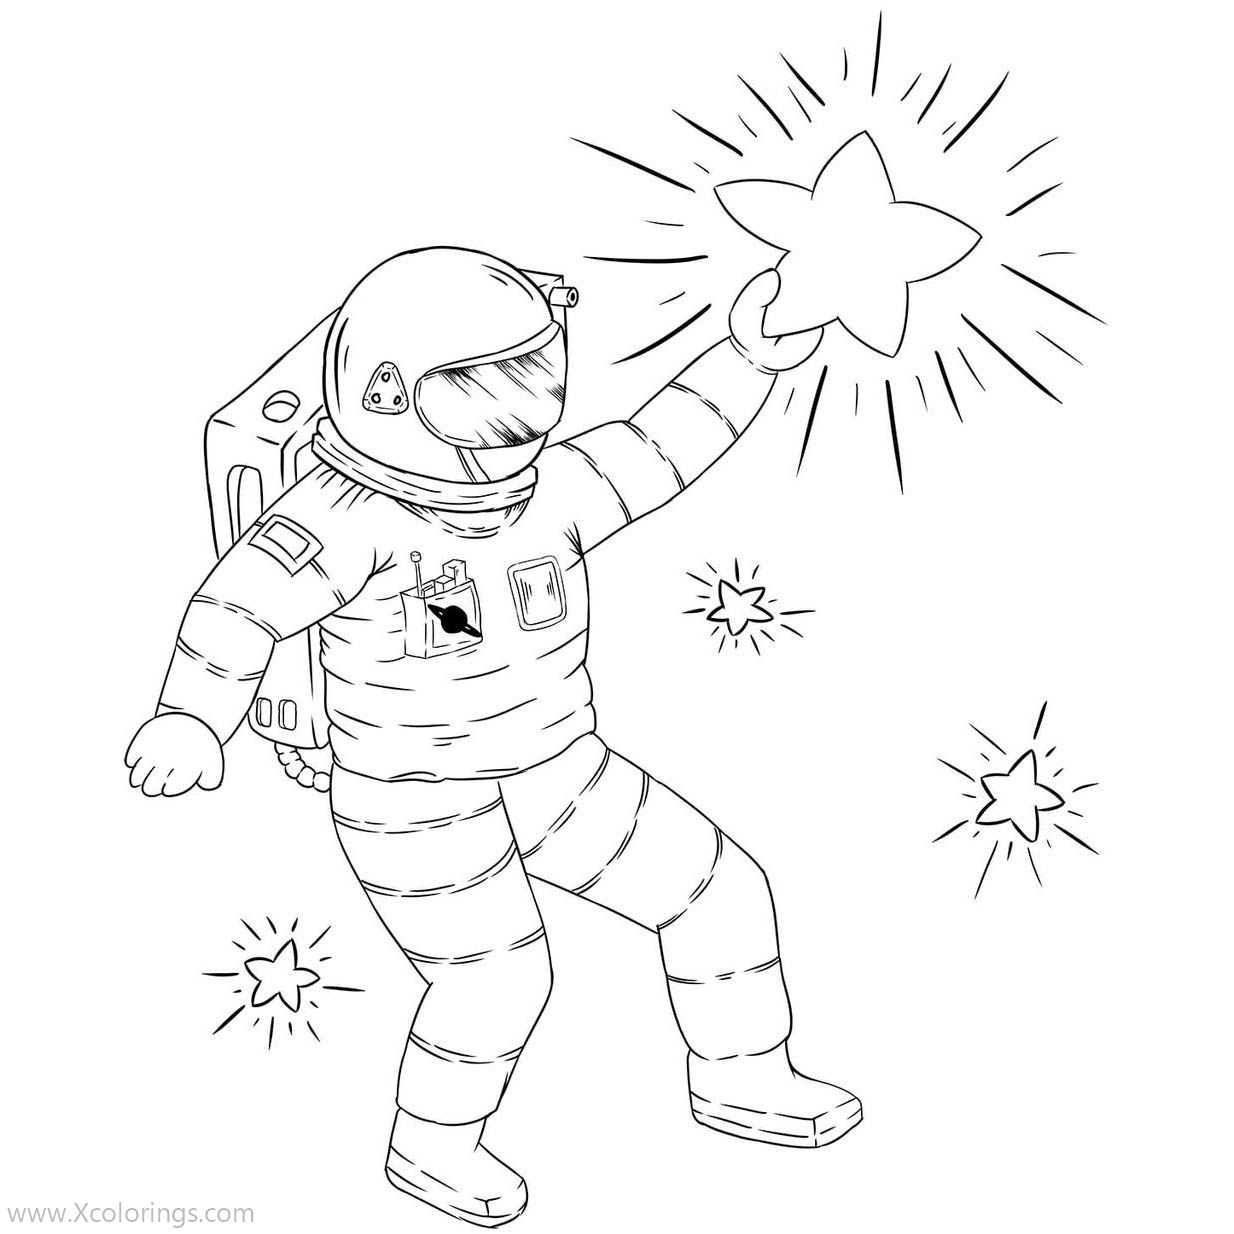 Free Astronaut Catching A Star Coloring Pages printable